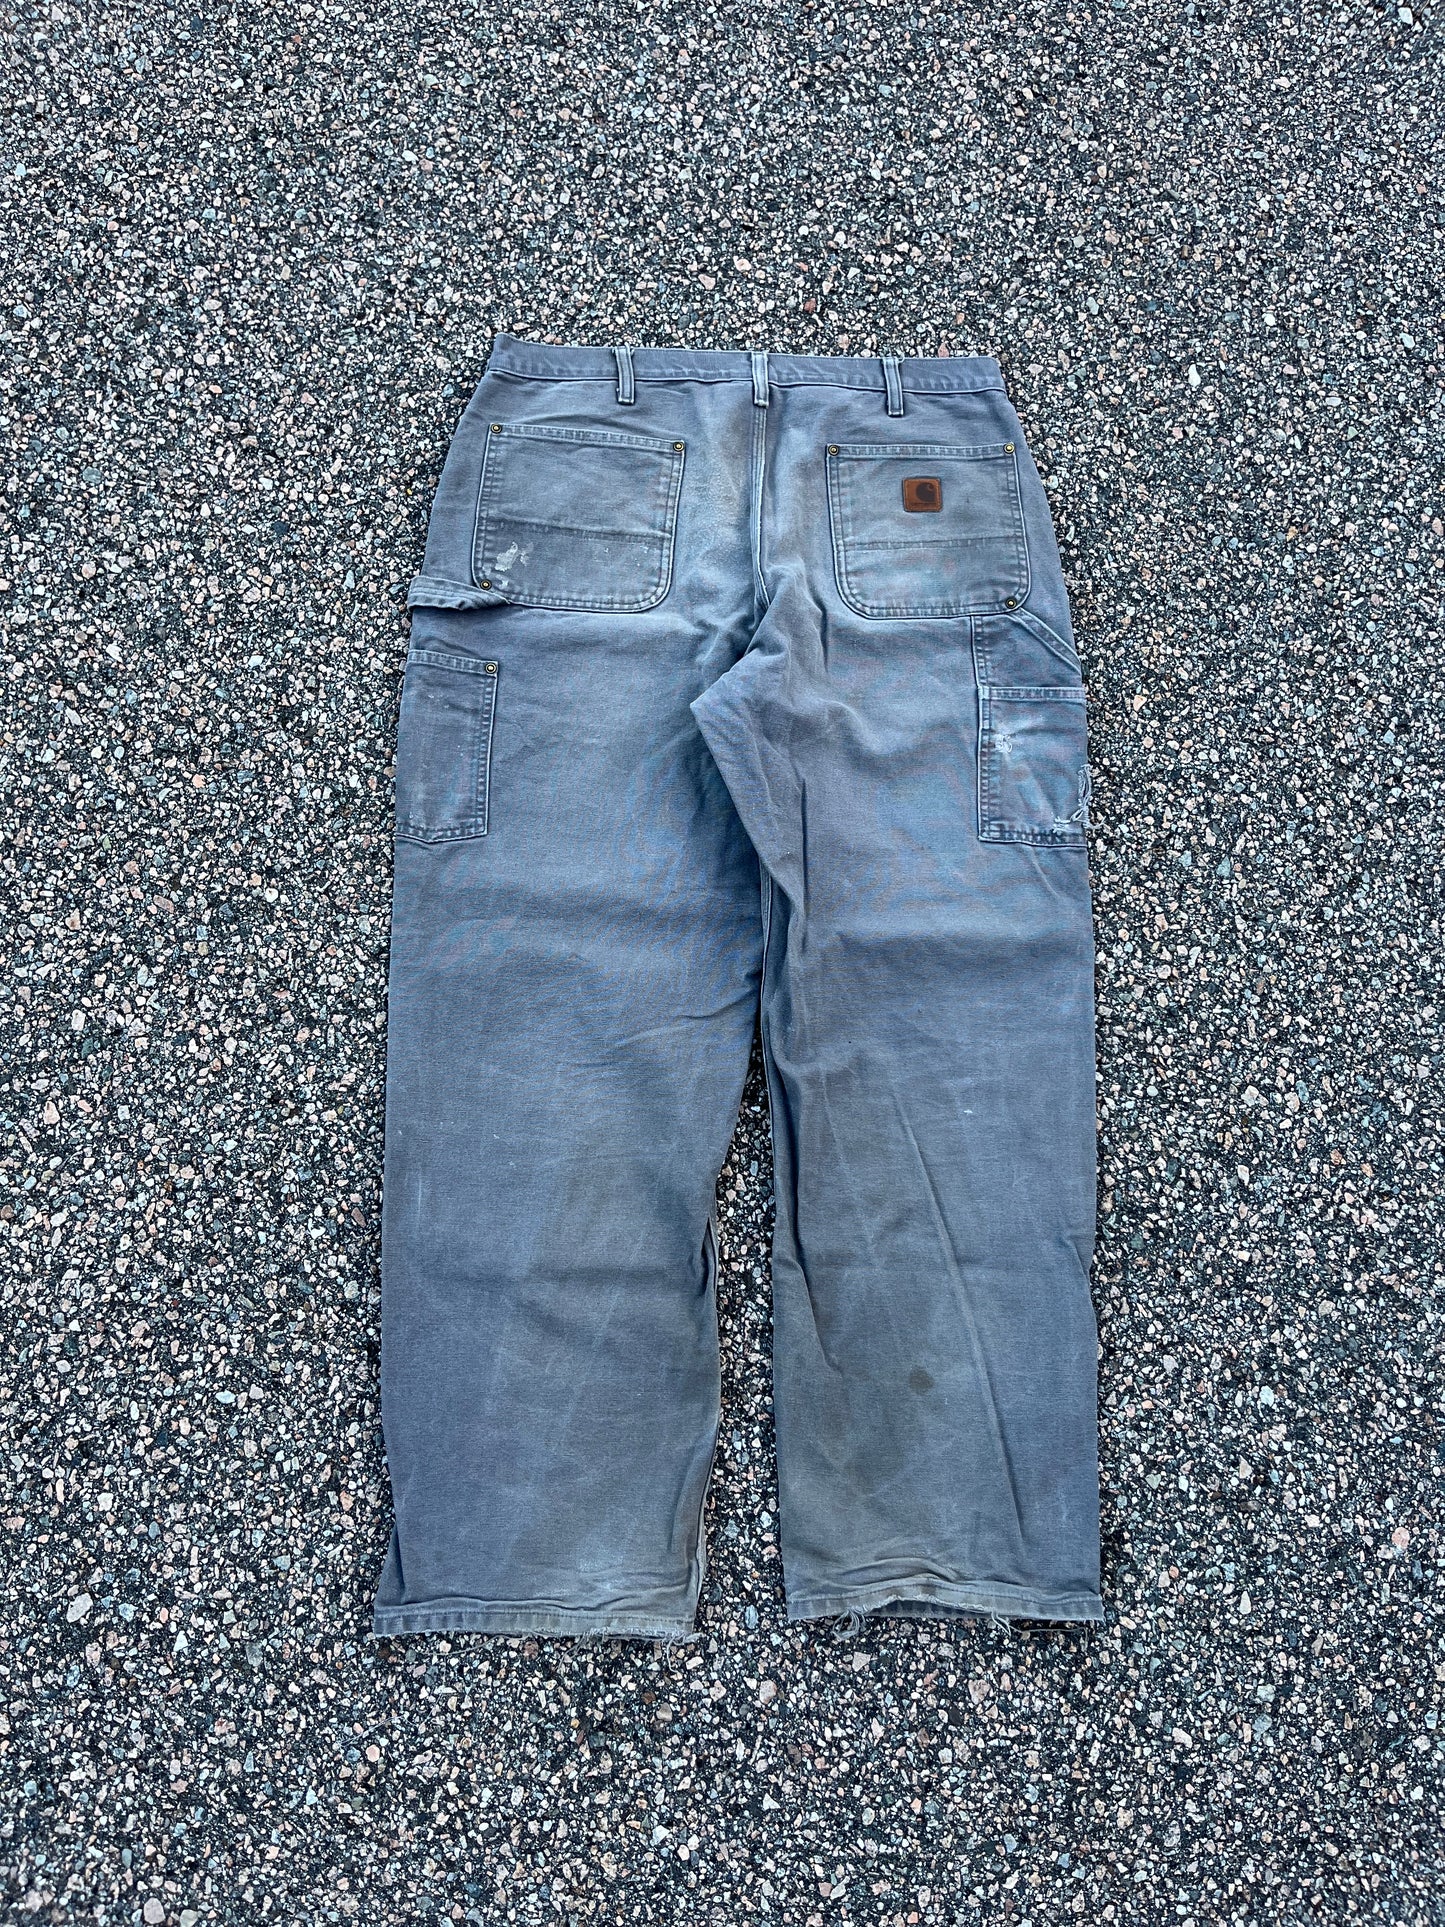 Faded Cement Grey Carhartt Double Knee Pants - 35 x 30